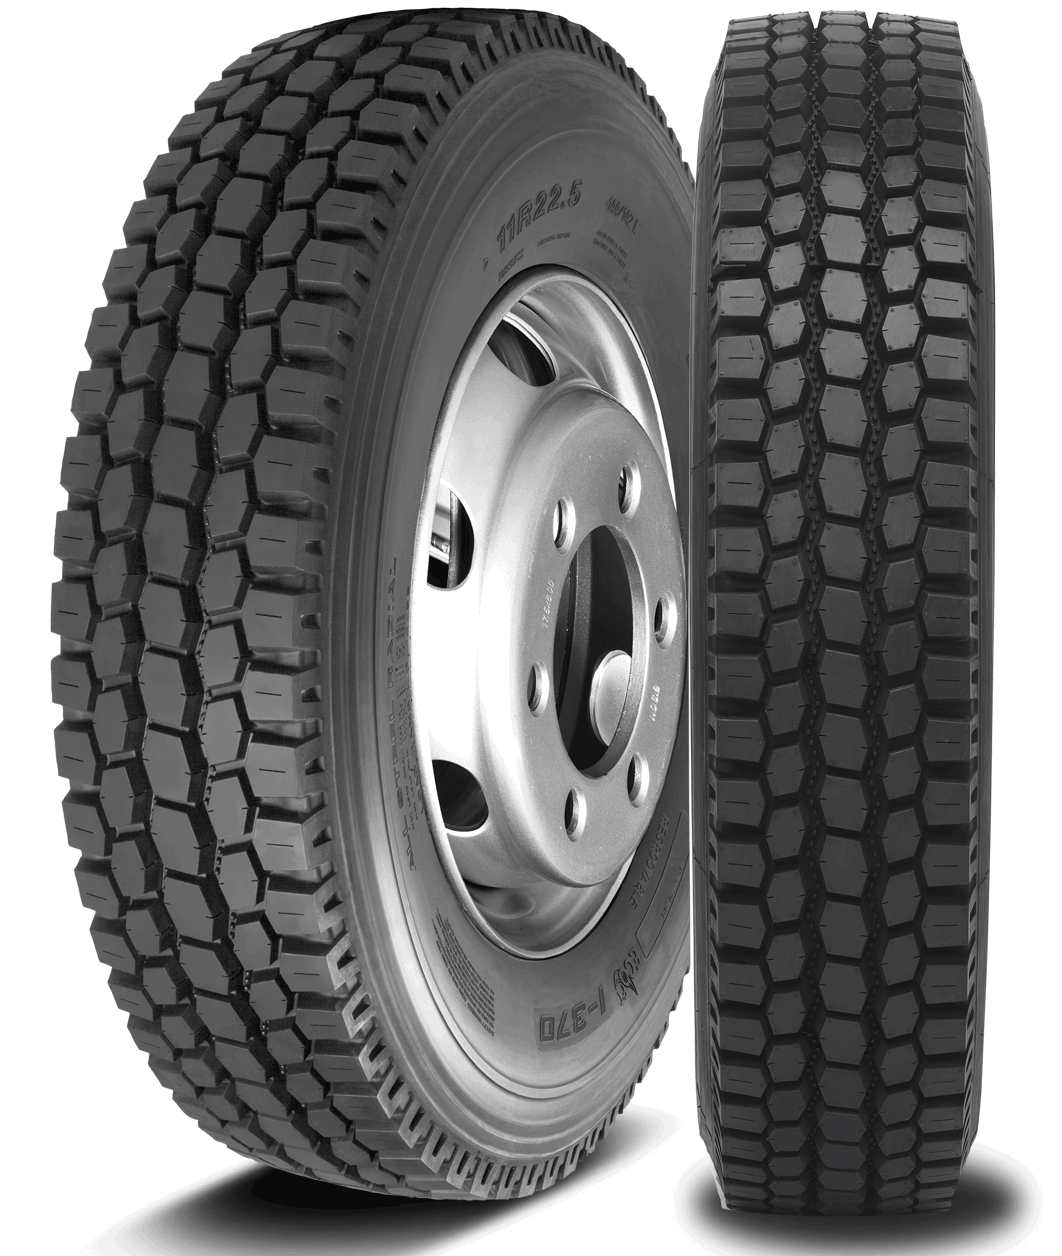 IRONMAN I-370 Commercial Truck Tire 285/75-24.5 144L 